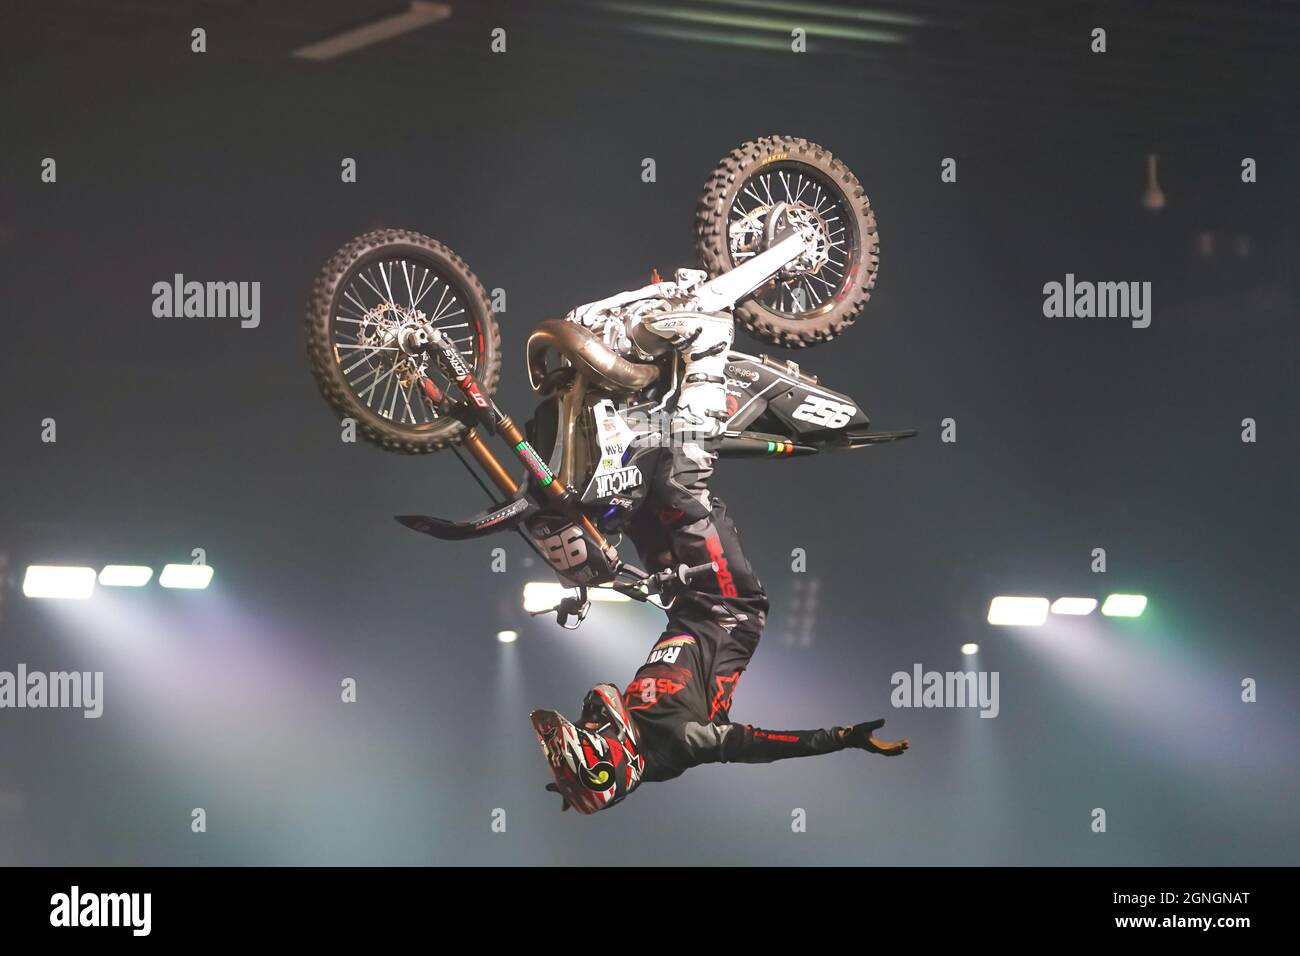 Basel, Switzerland. 25th Sep, 2021. Edgar Torronteras (Team Spain) backflip jump during the NIGHT of the JUMPs (Freestyle of Nations) FMX motorcross event at St. Jakobshalle in Basel, Switzerland. Credit: SPP Sport Press Photo. /Alamy Live News Stock Photo